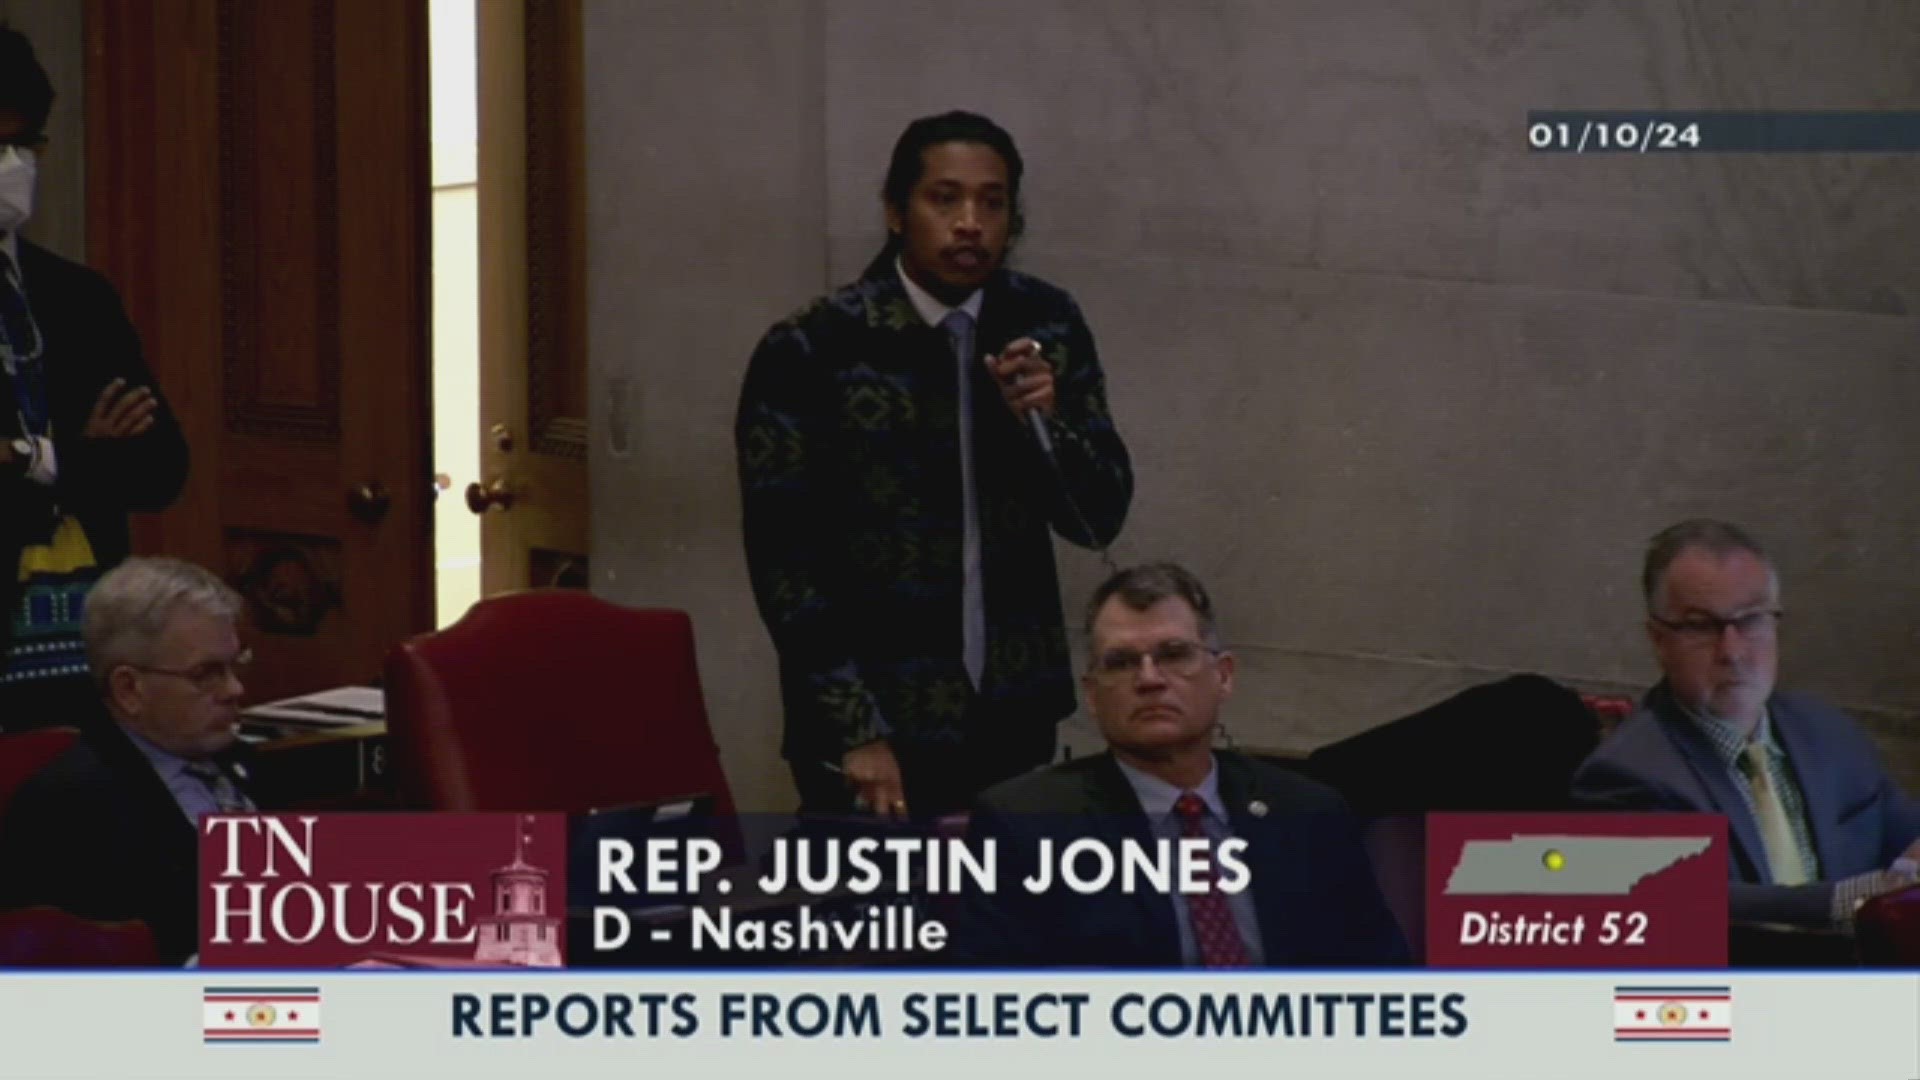 On the second day of the legislative session in Nashville, democratic lawmaker Justin Jones was ruled out of order.